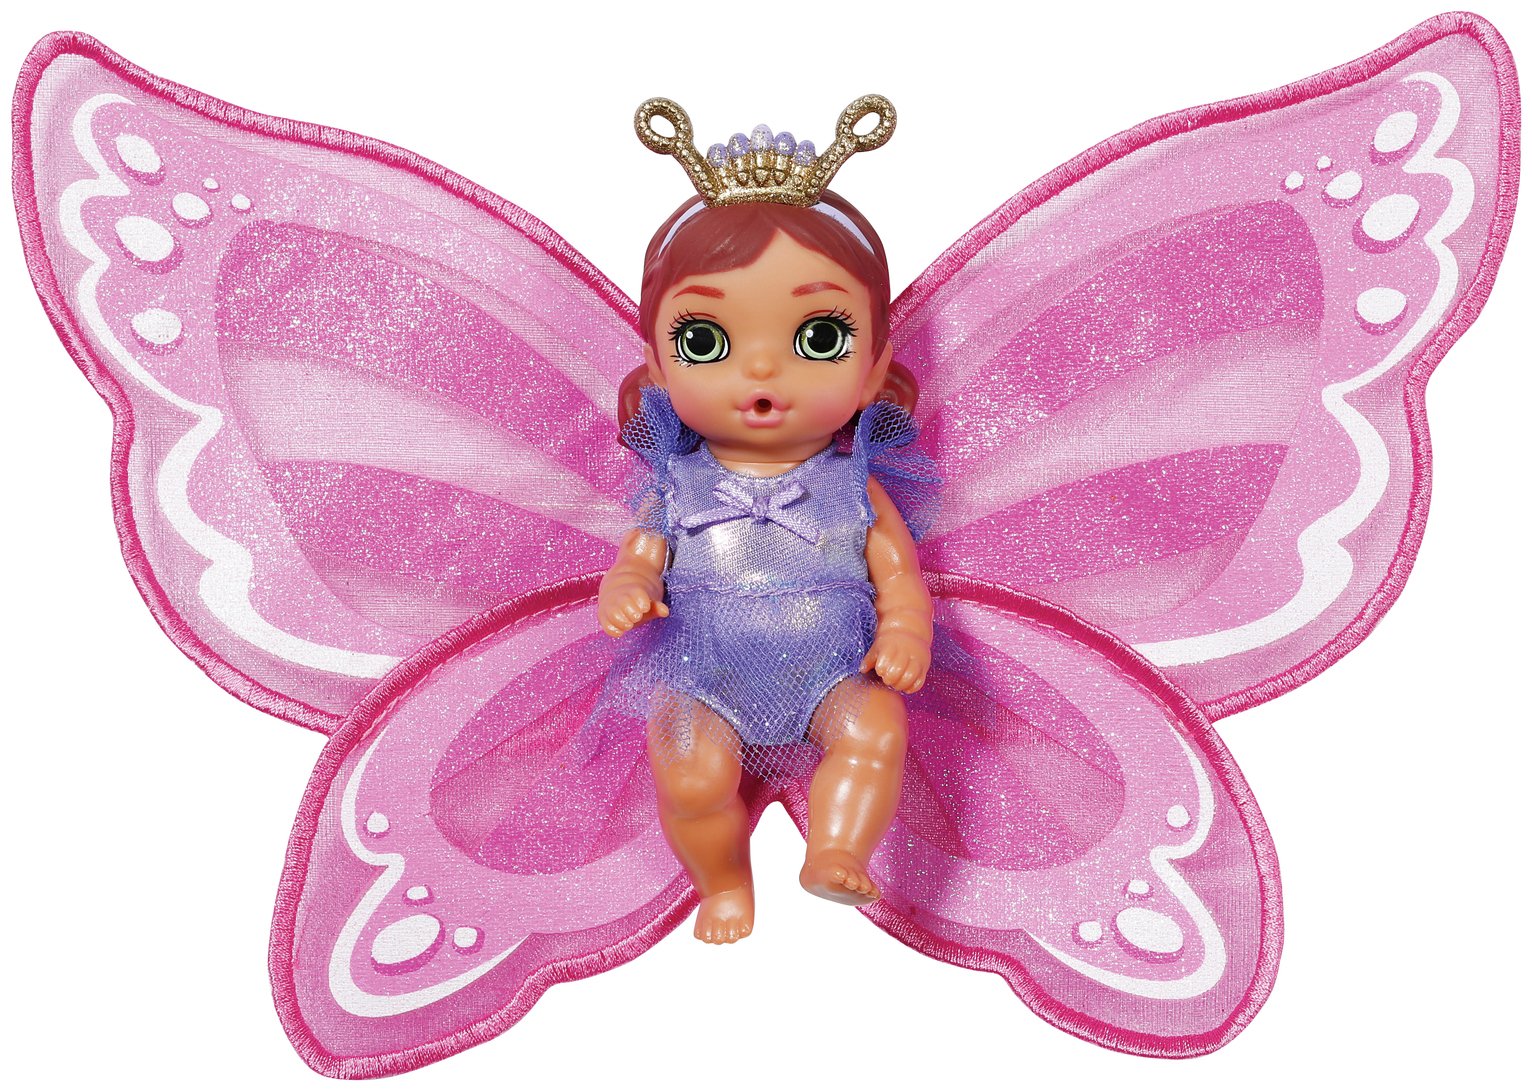 Buy BABY born Doll Surprise Wave 3 